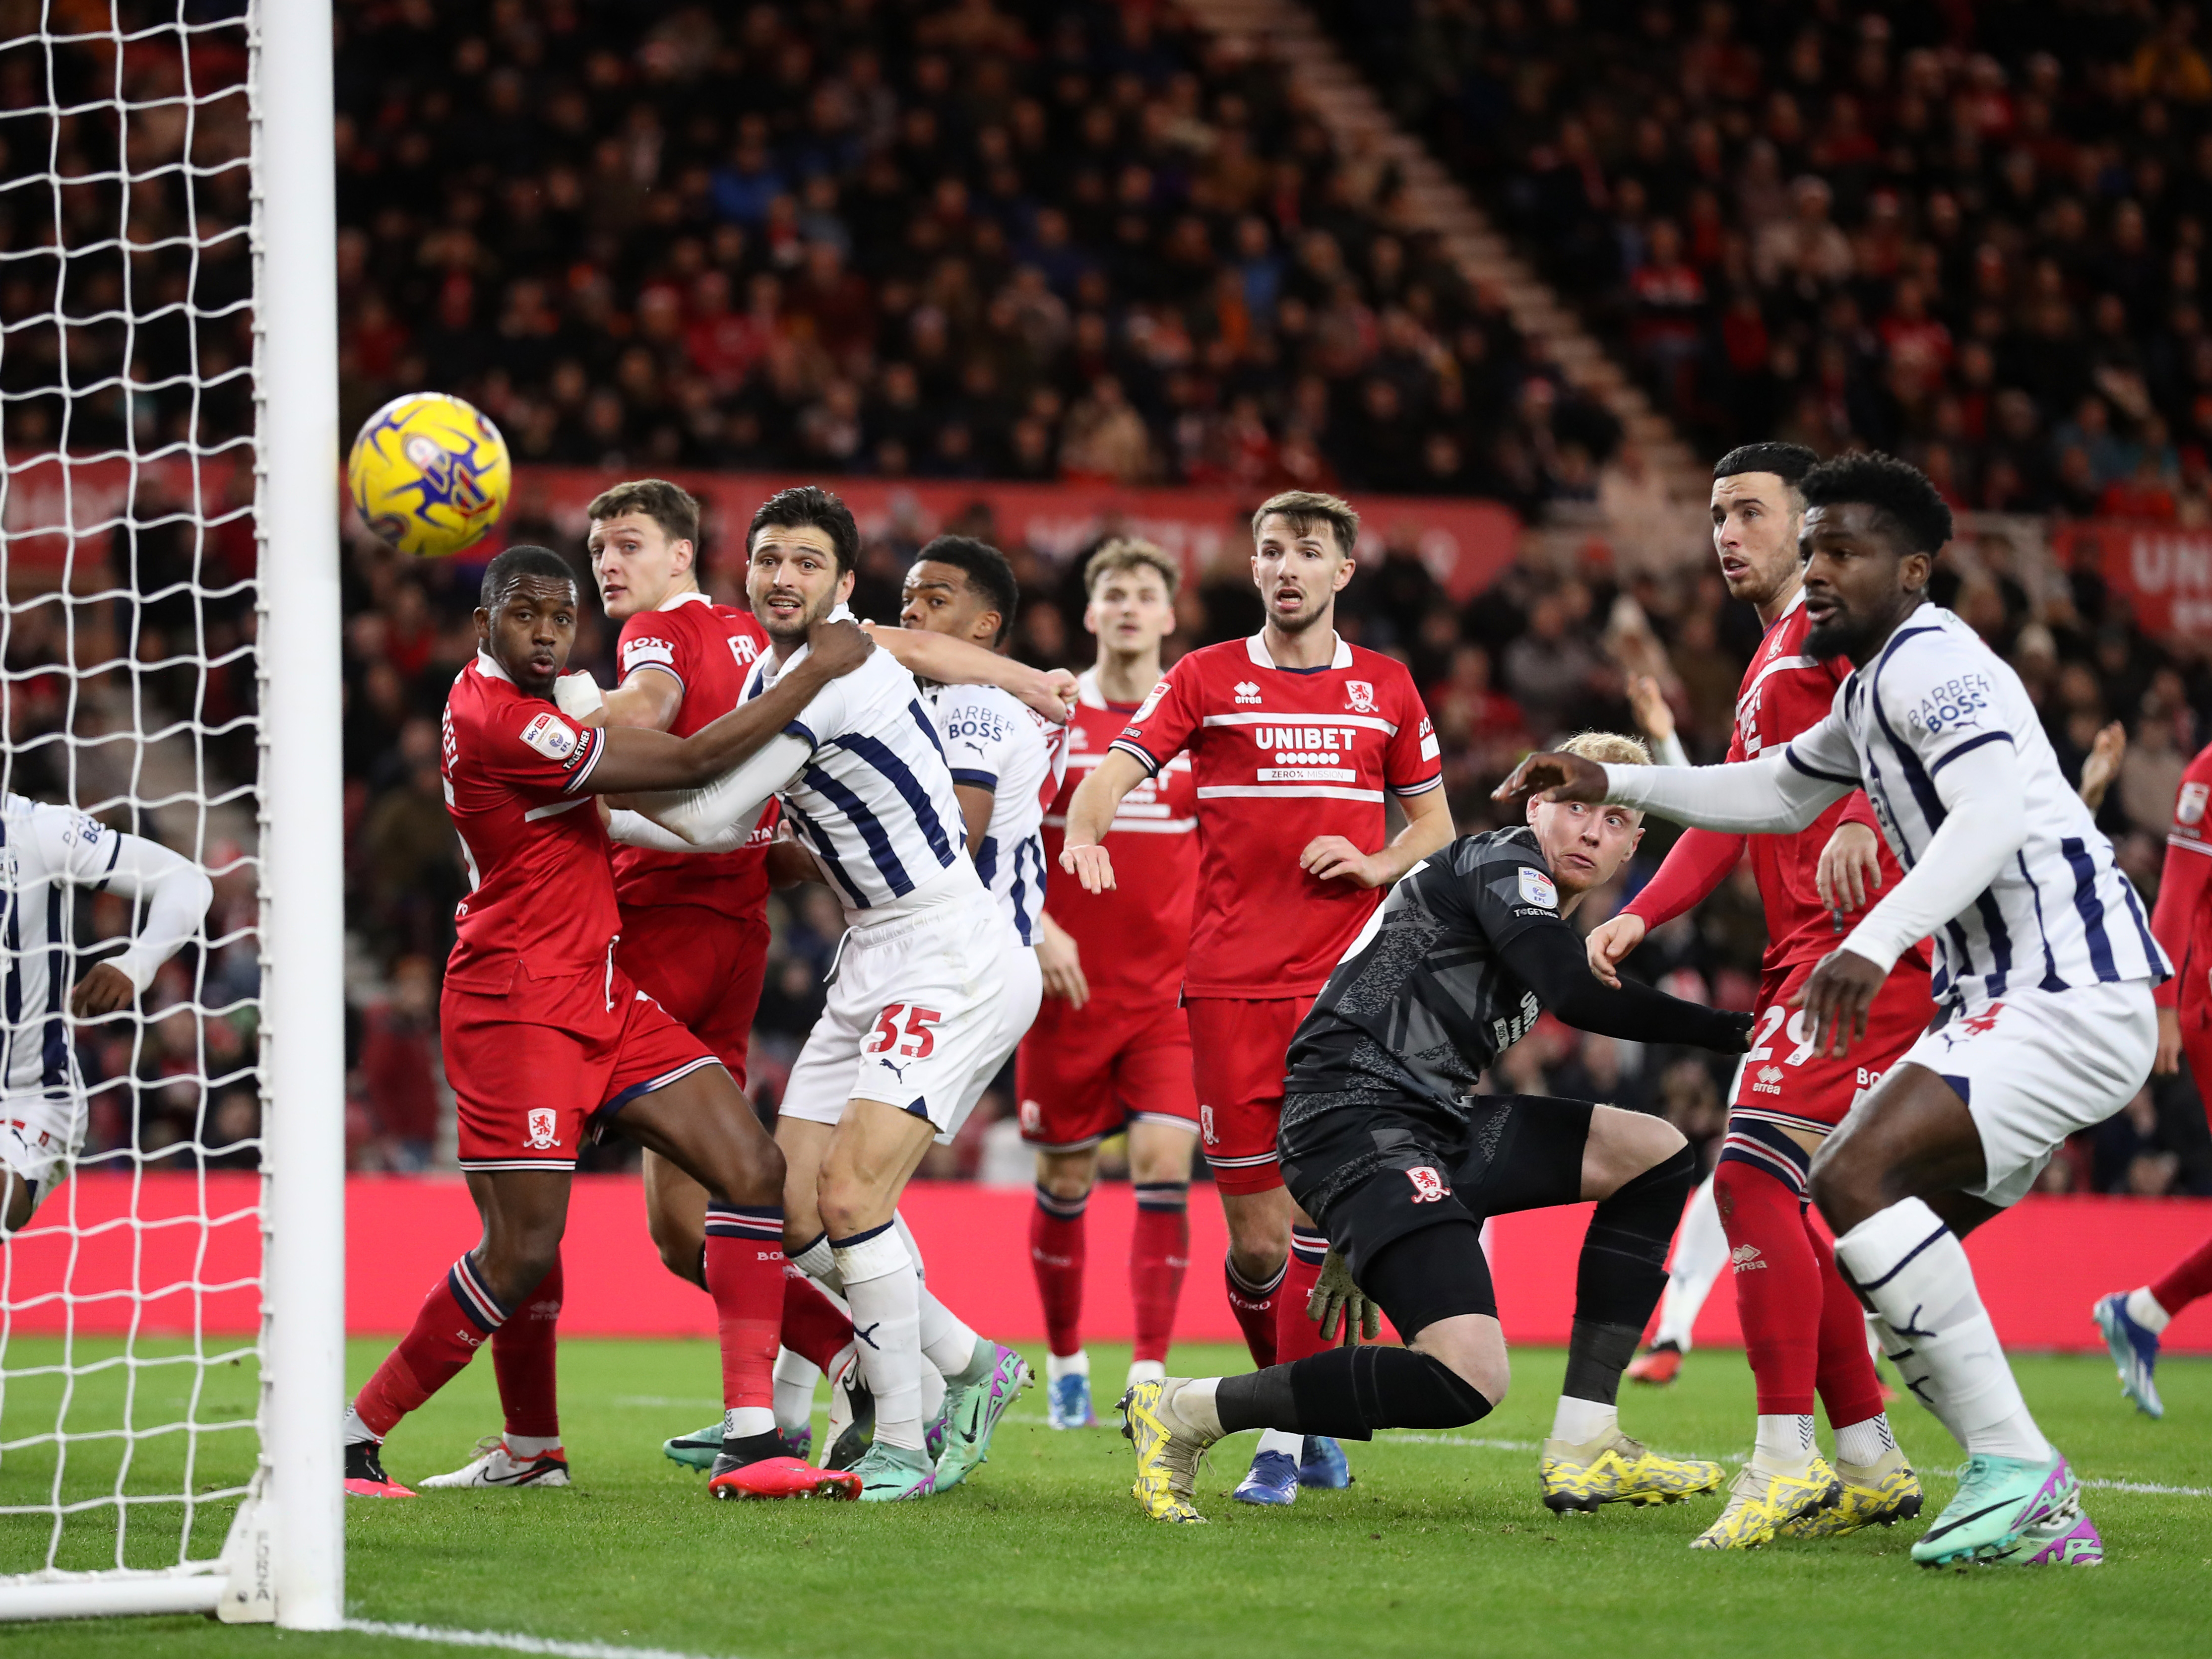 An image of Albion hitting the post